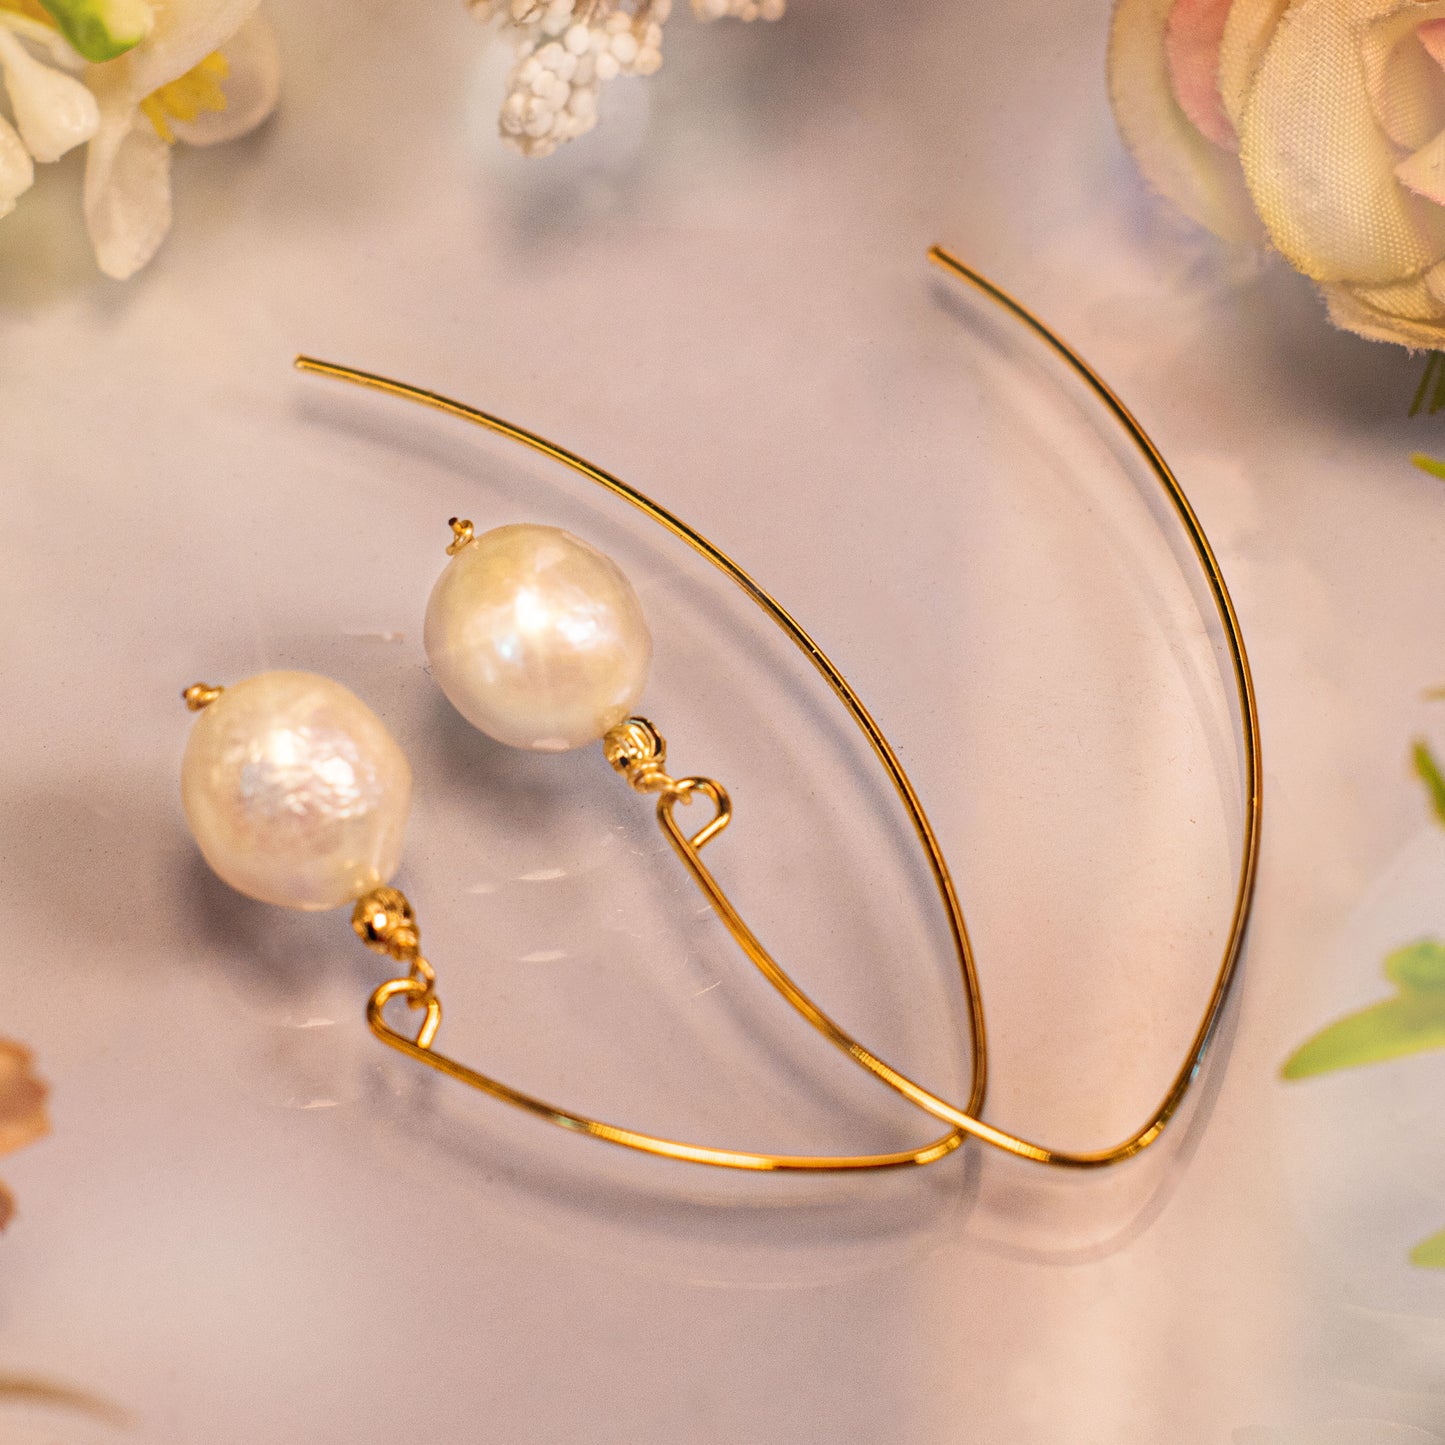 Peculiar Natural Baroque Pearls 18k Gold Plated Minimalist Drop Earrings - Jewelry